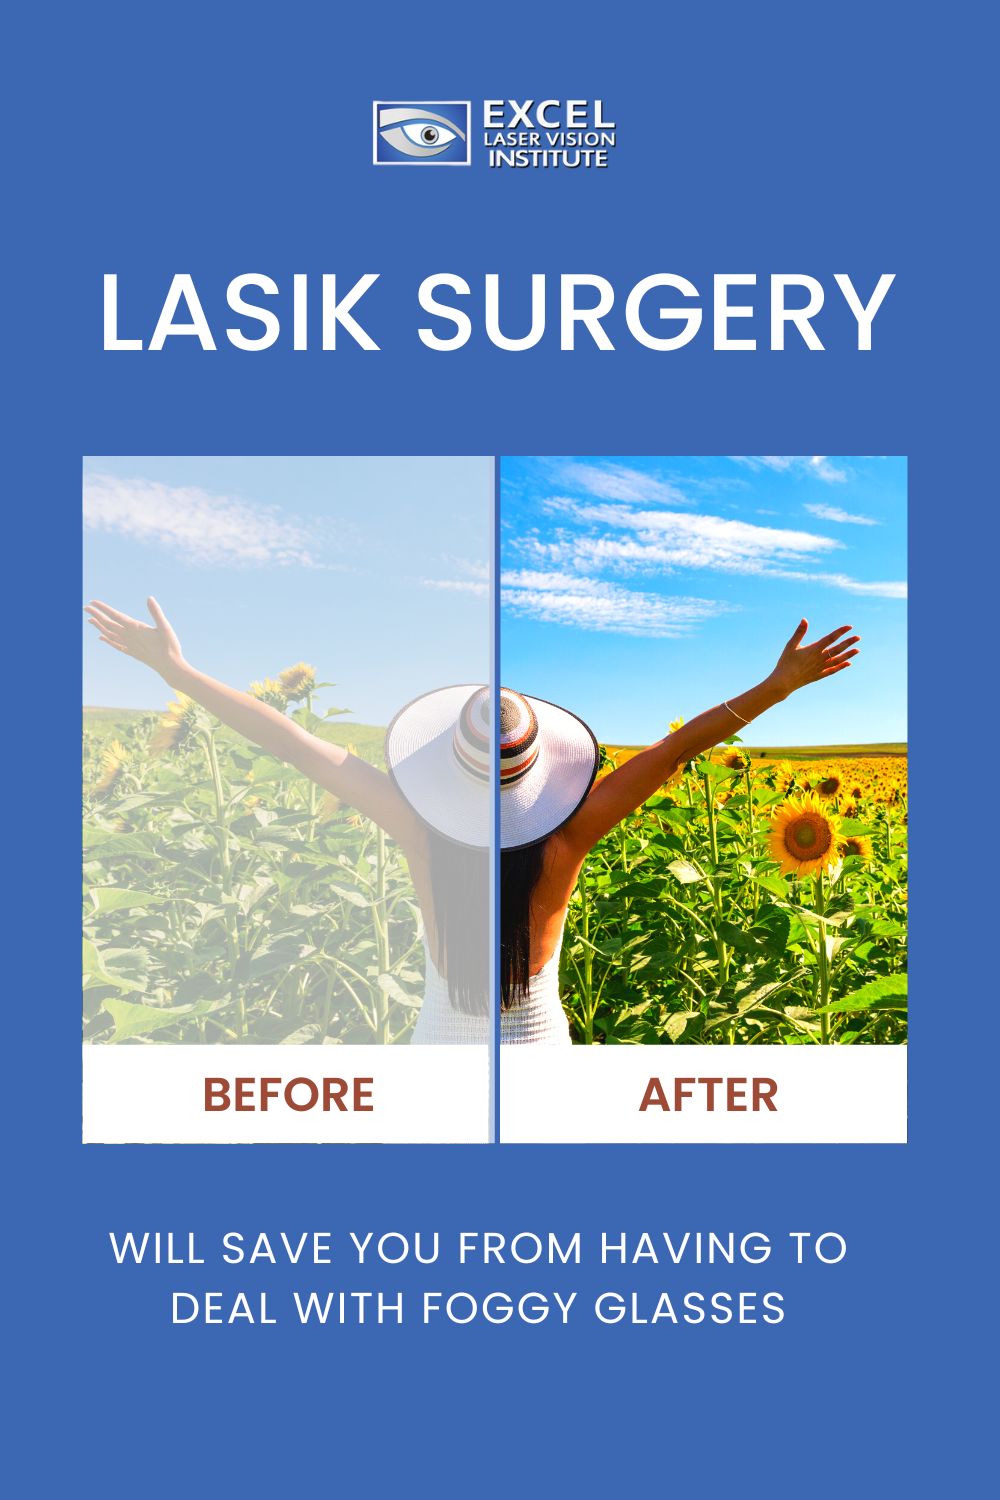 Improve-Your-Quality-of-Life-with-LASIK-Surgery-in-Los-Angeles-Pinterest-Pin